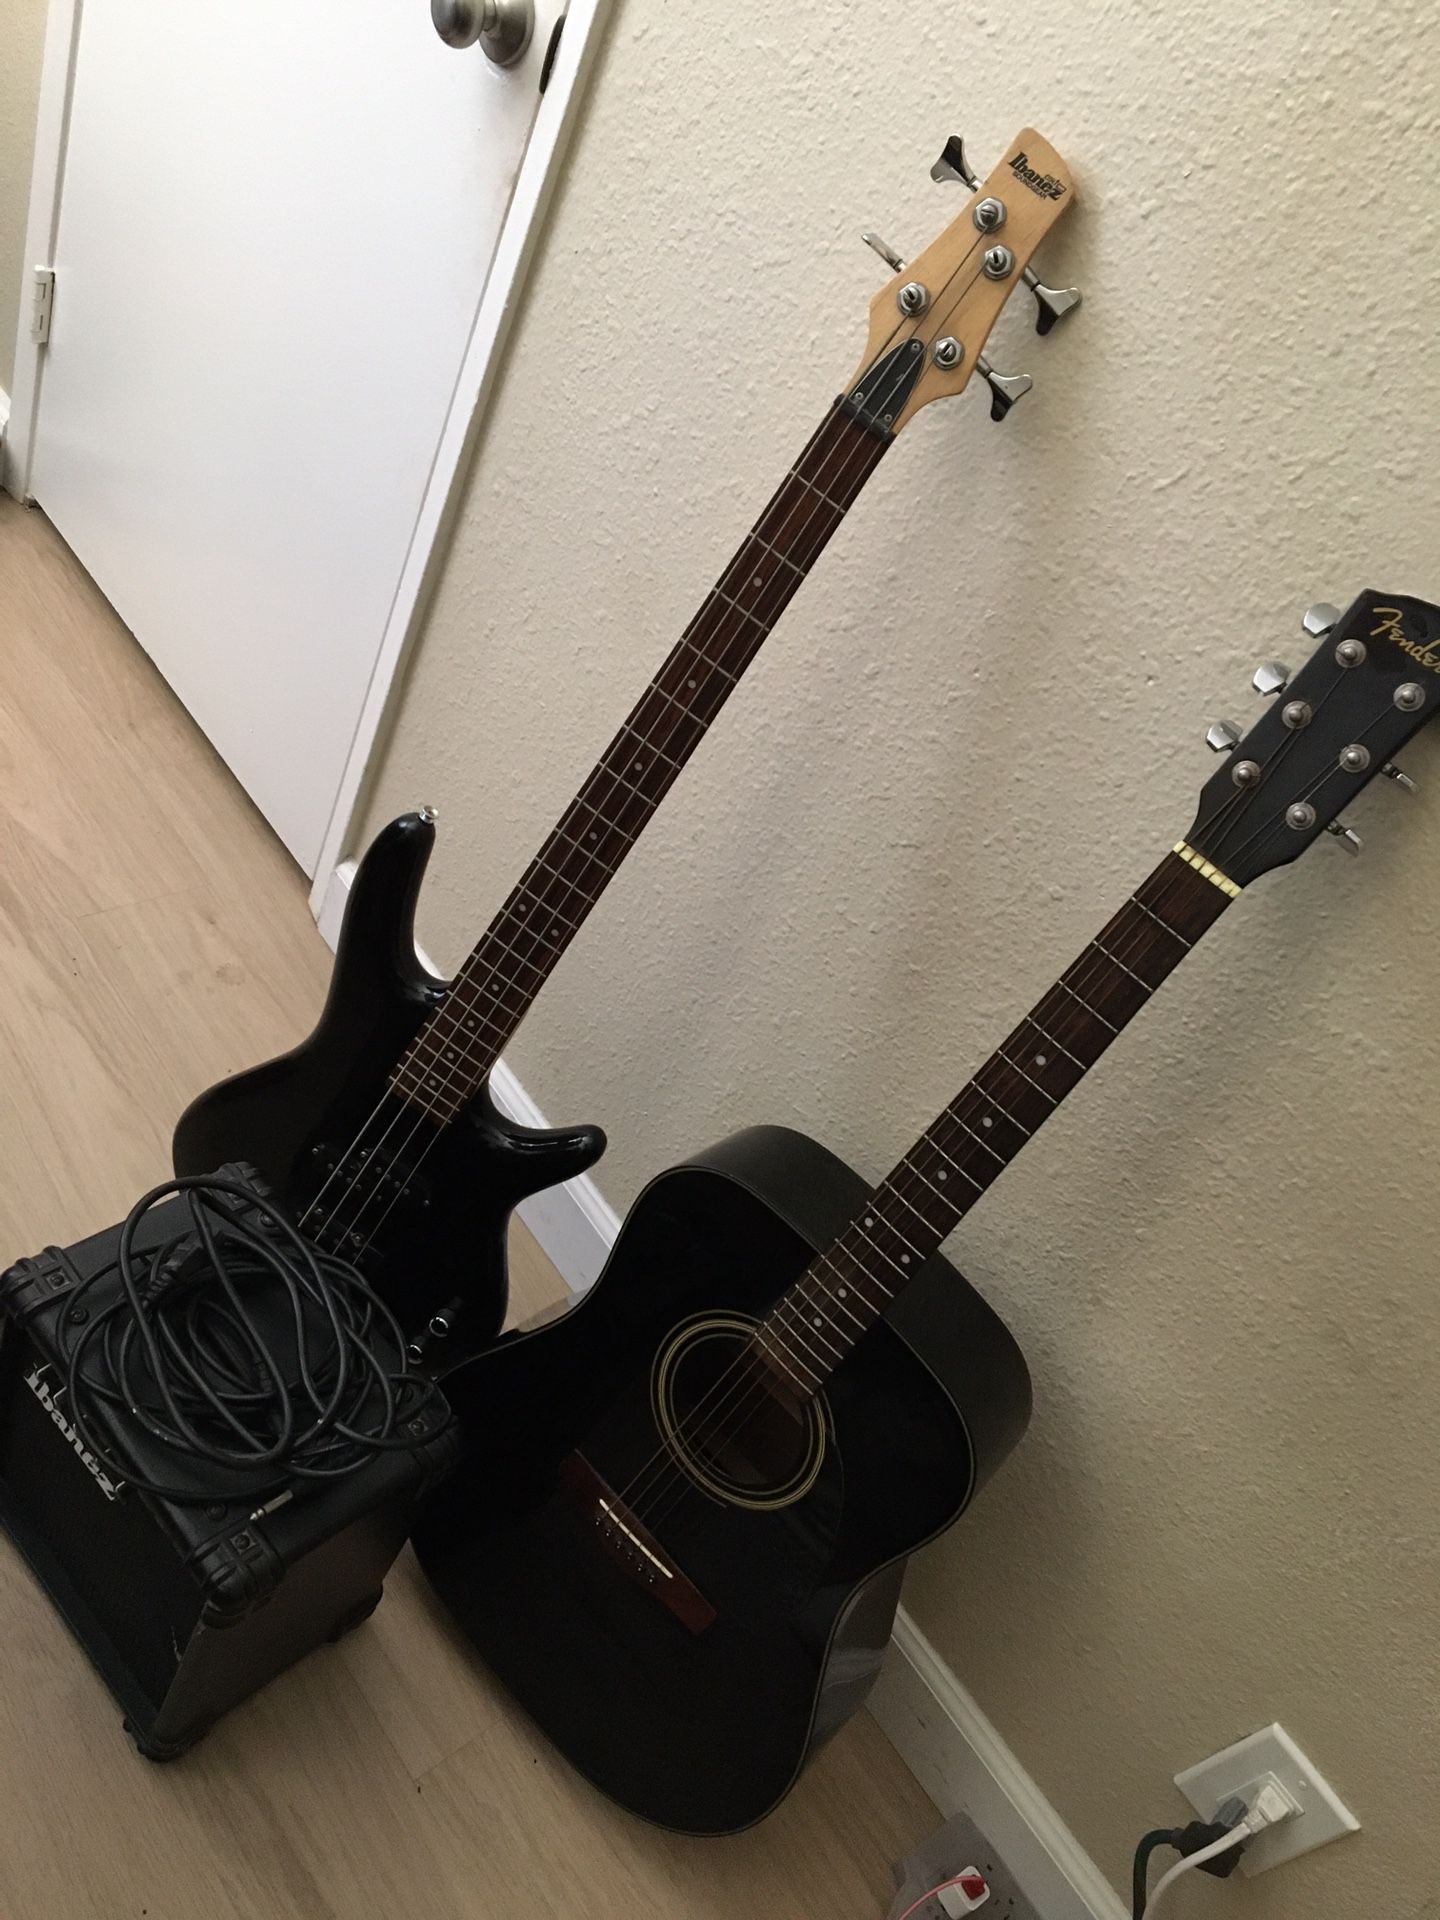 Fender Electric Acustic Gio Ibanez Bass Guitar and Ibanez Speaker Amp